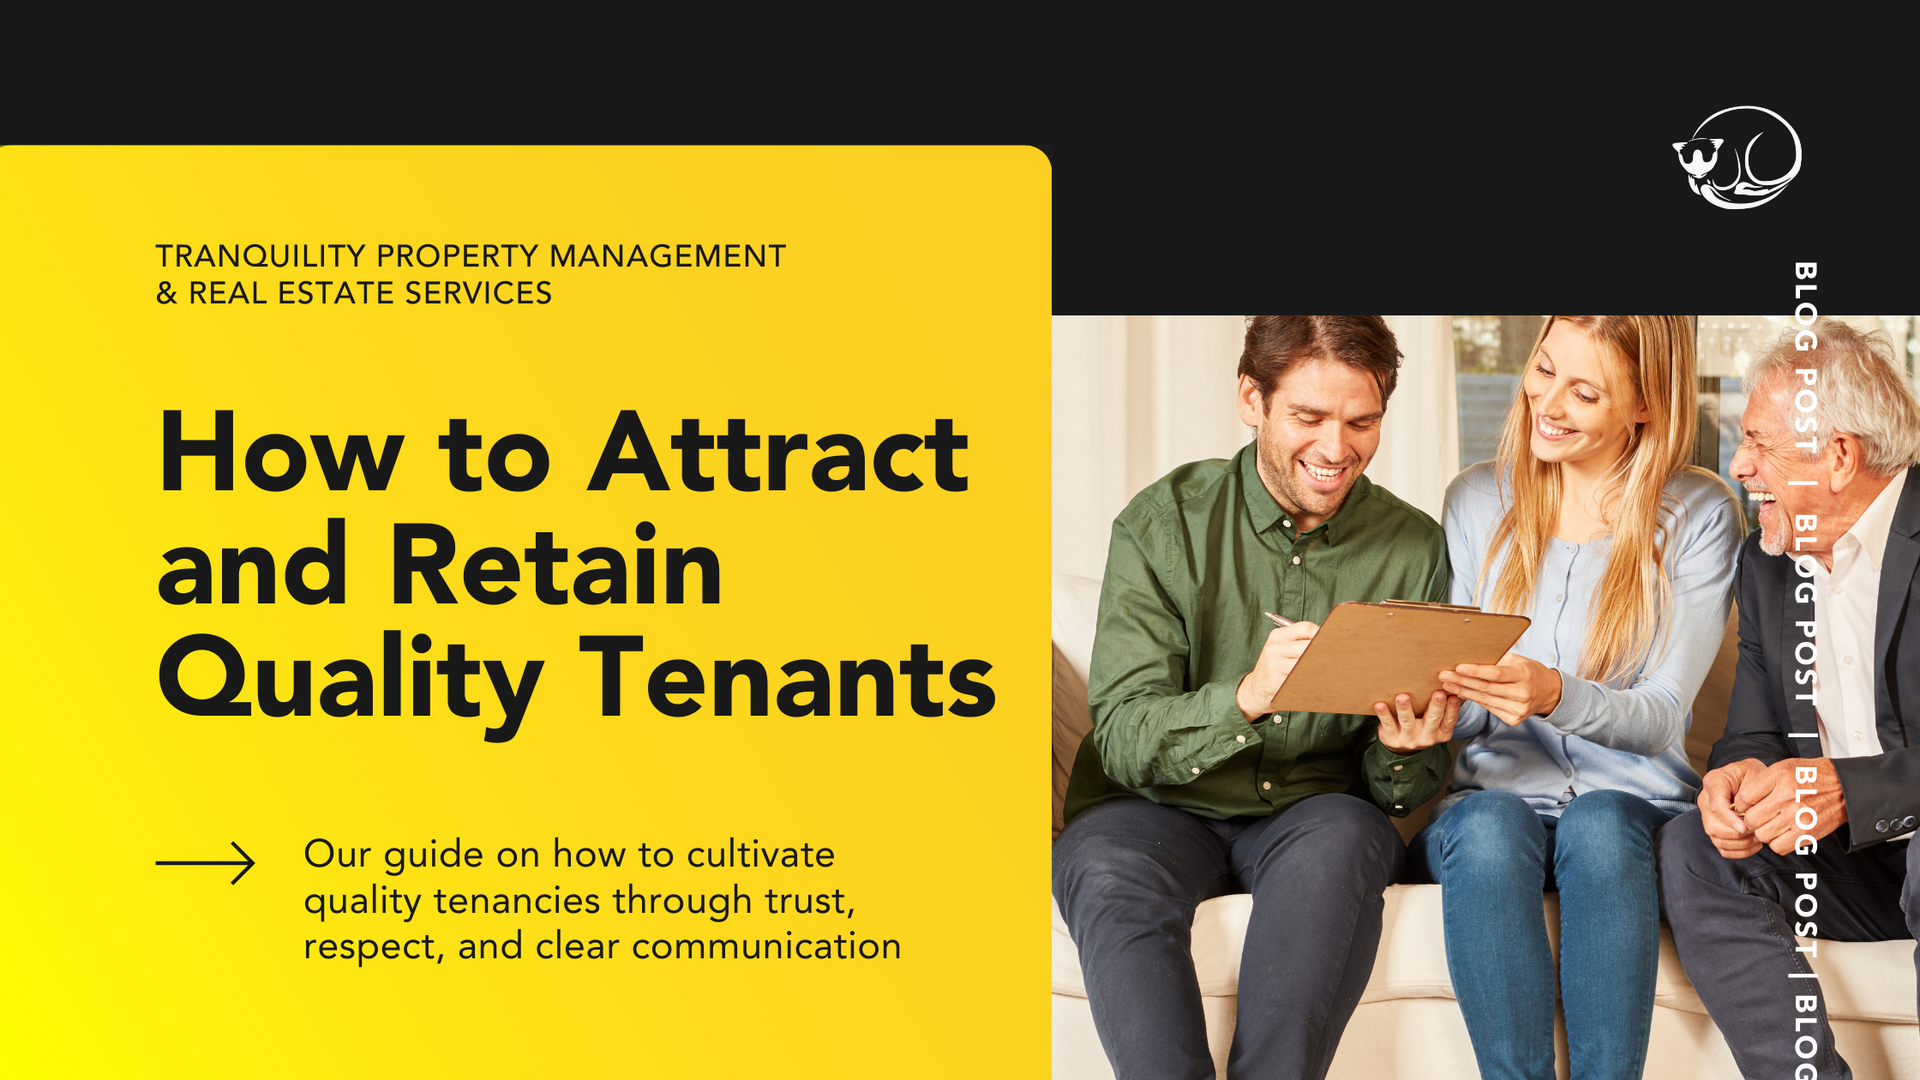 How to Attract & Retain Quality Tenants